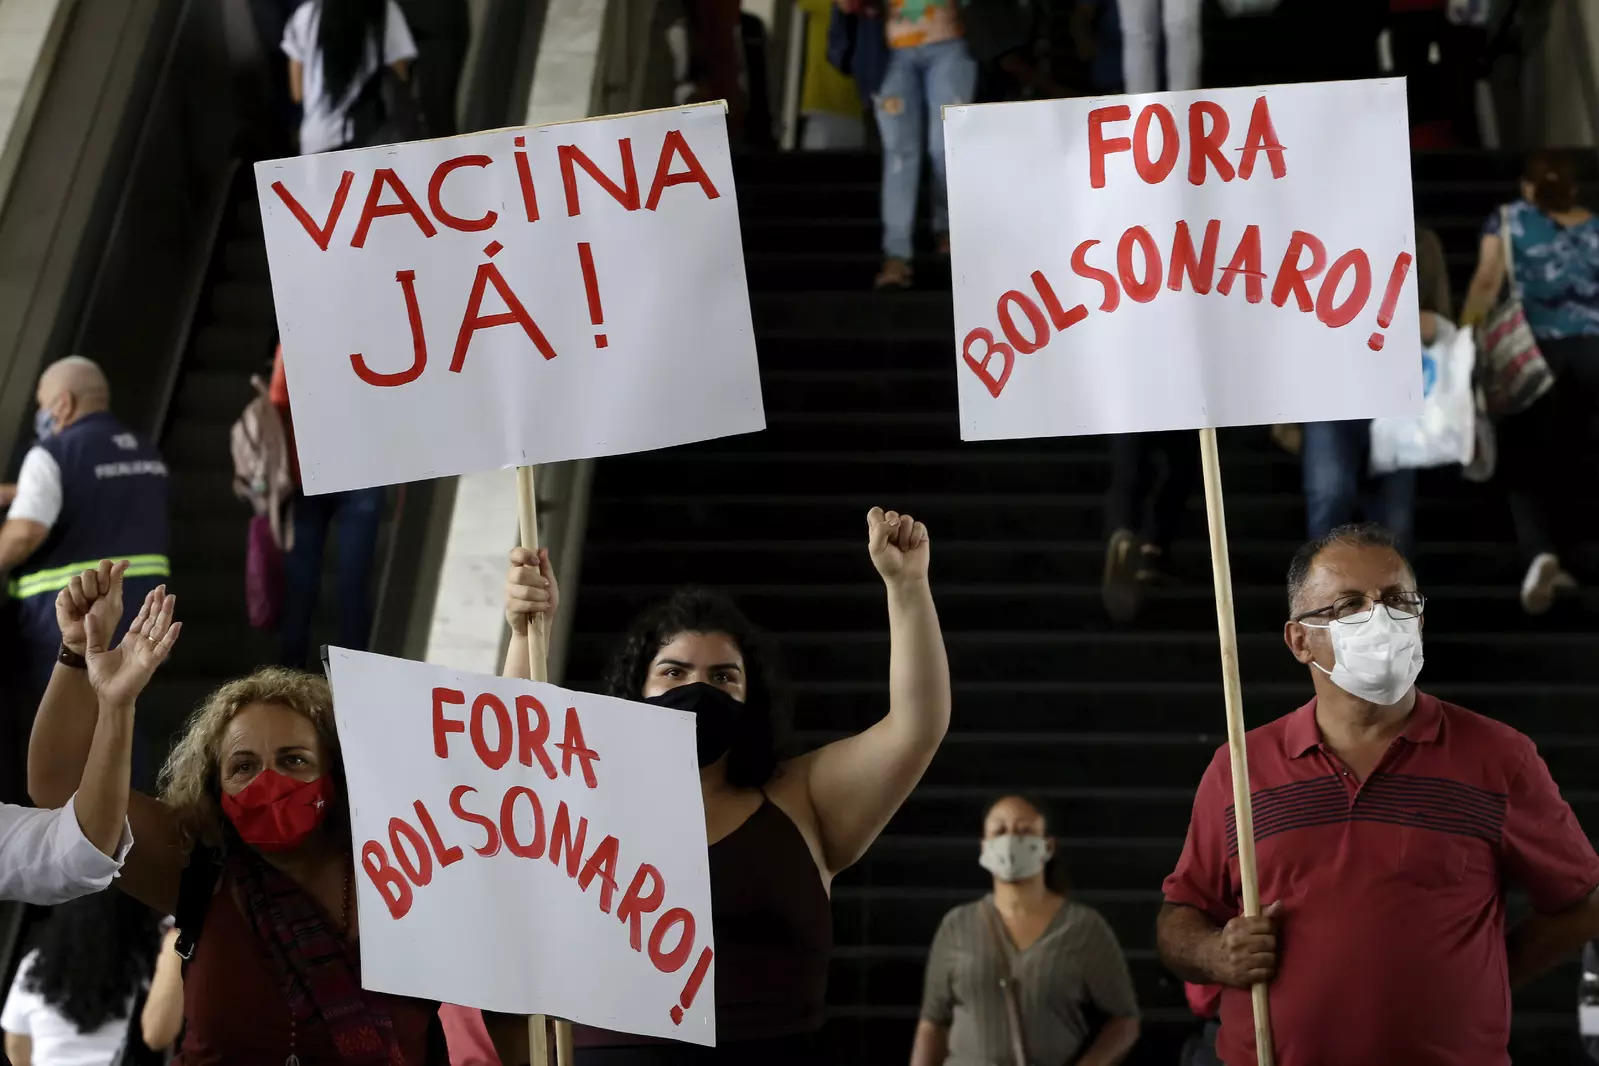 FILE - In this Dec. 23, 2020 file photo, "Vaccine now!" and "Get out Bolsonaro," in a protest against Brazilian President Jair Bolsonaro's handling of the new coronavirus pandemic, in Brasilia, Brazil.  